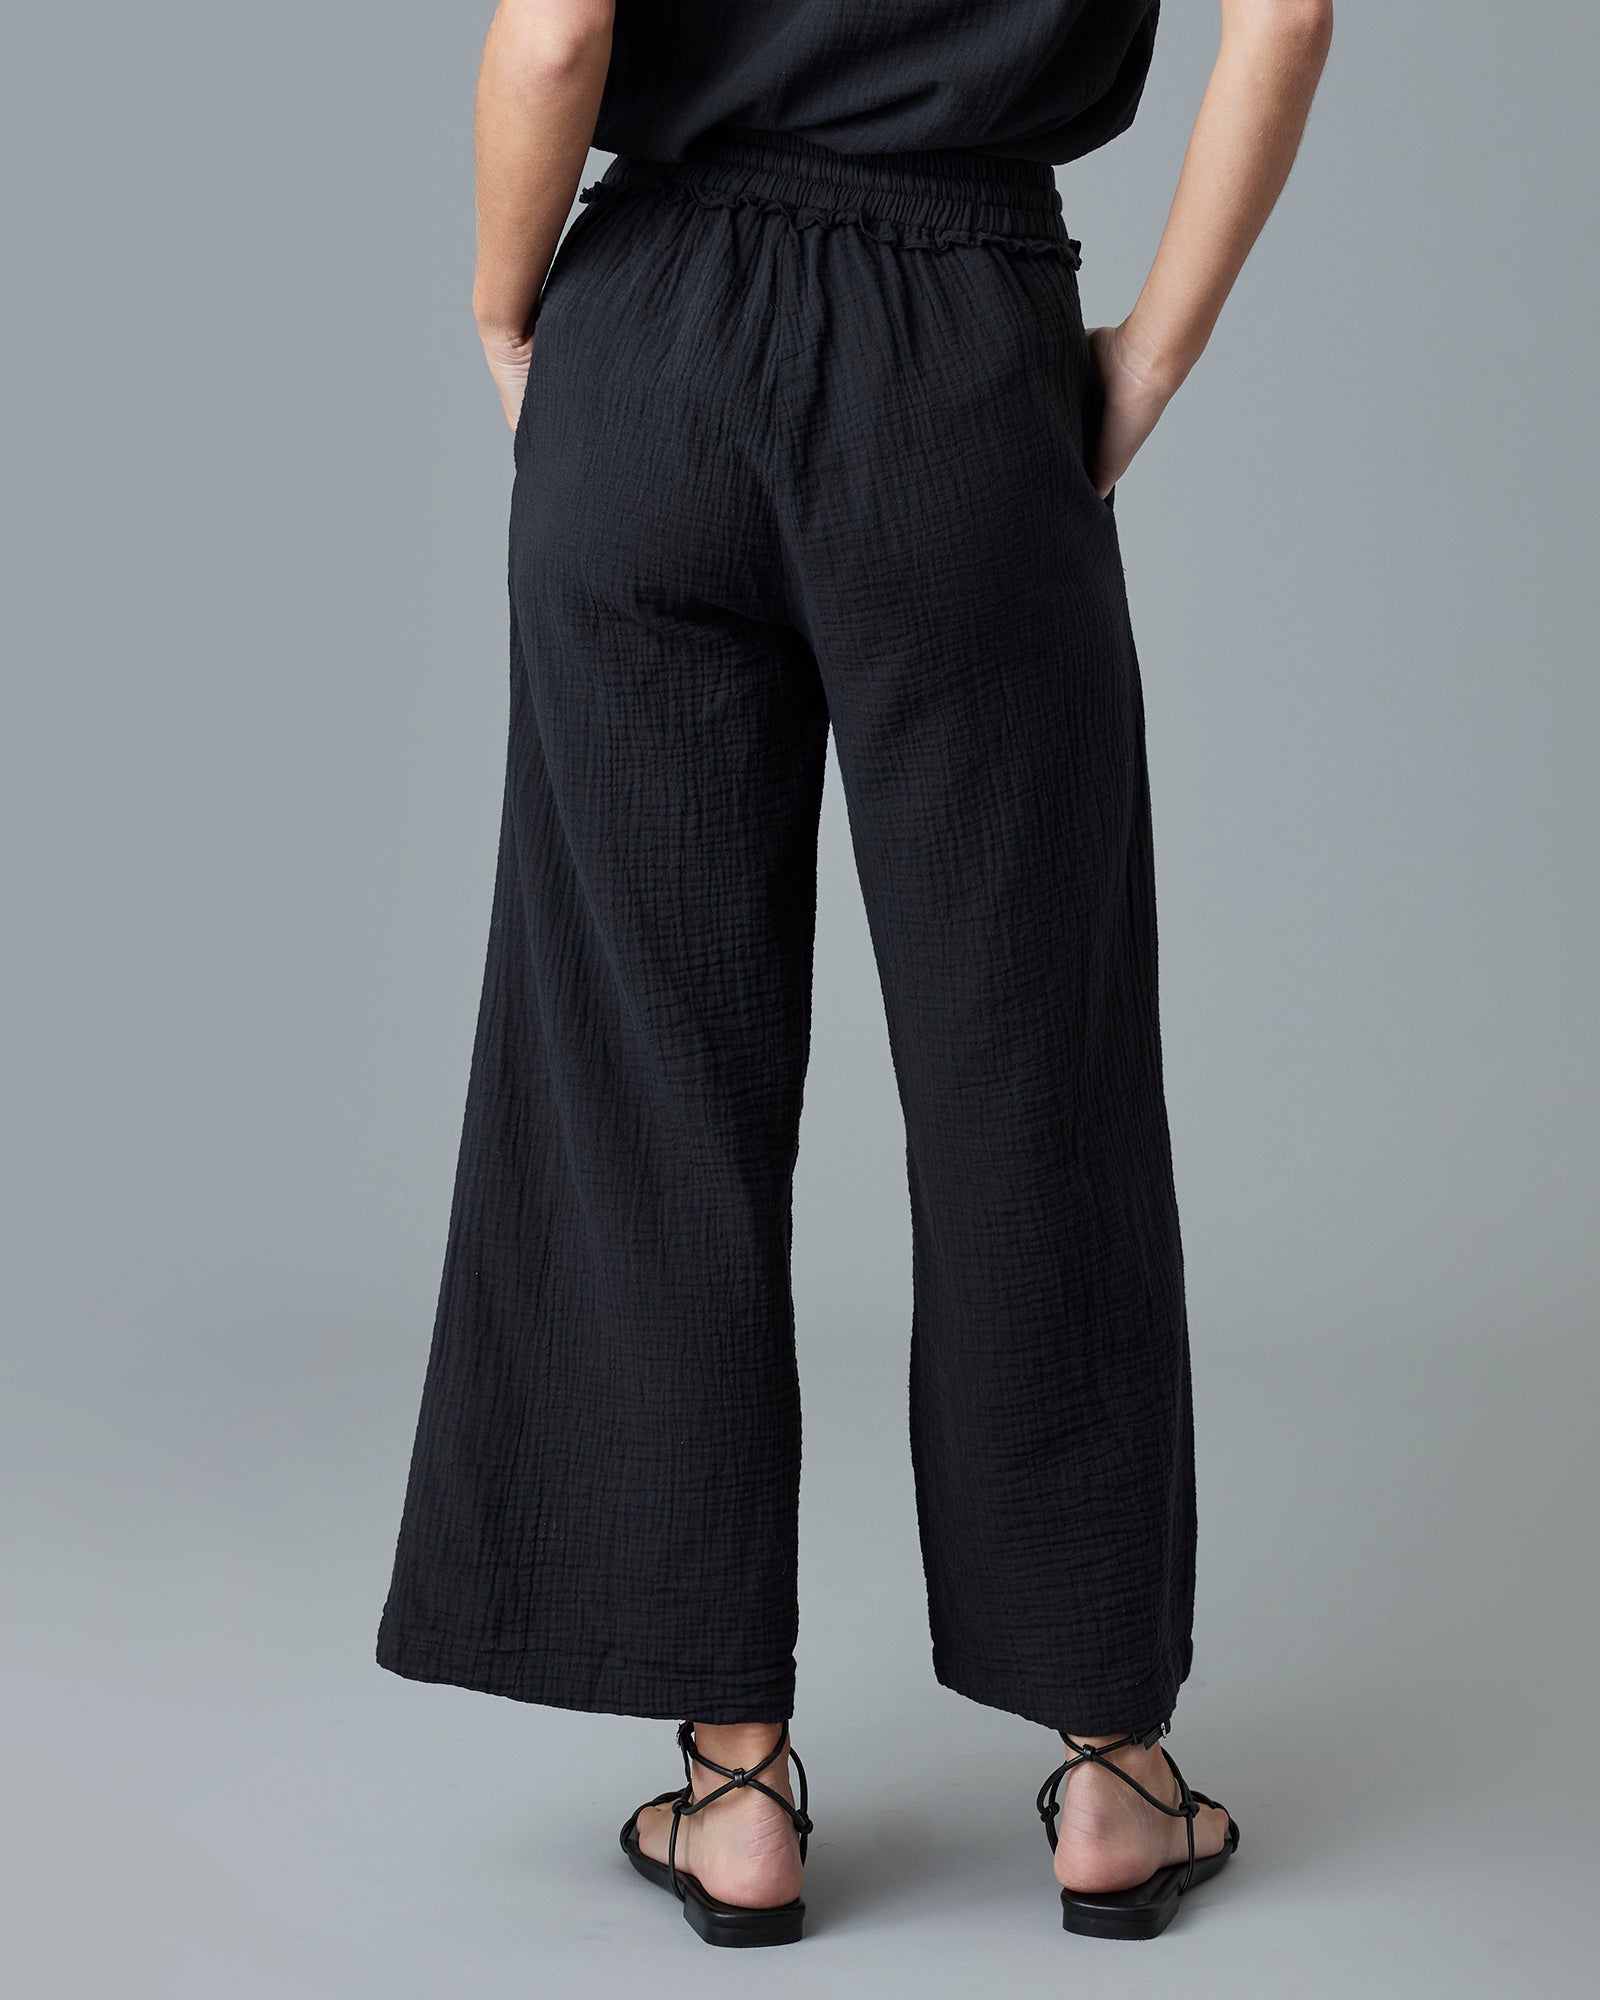 Woman in black ankle-length pants